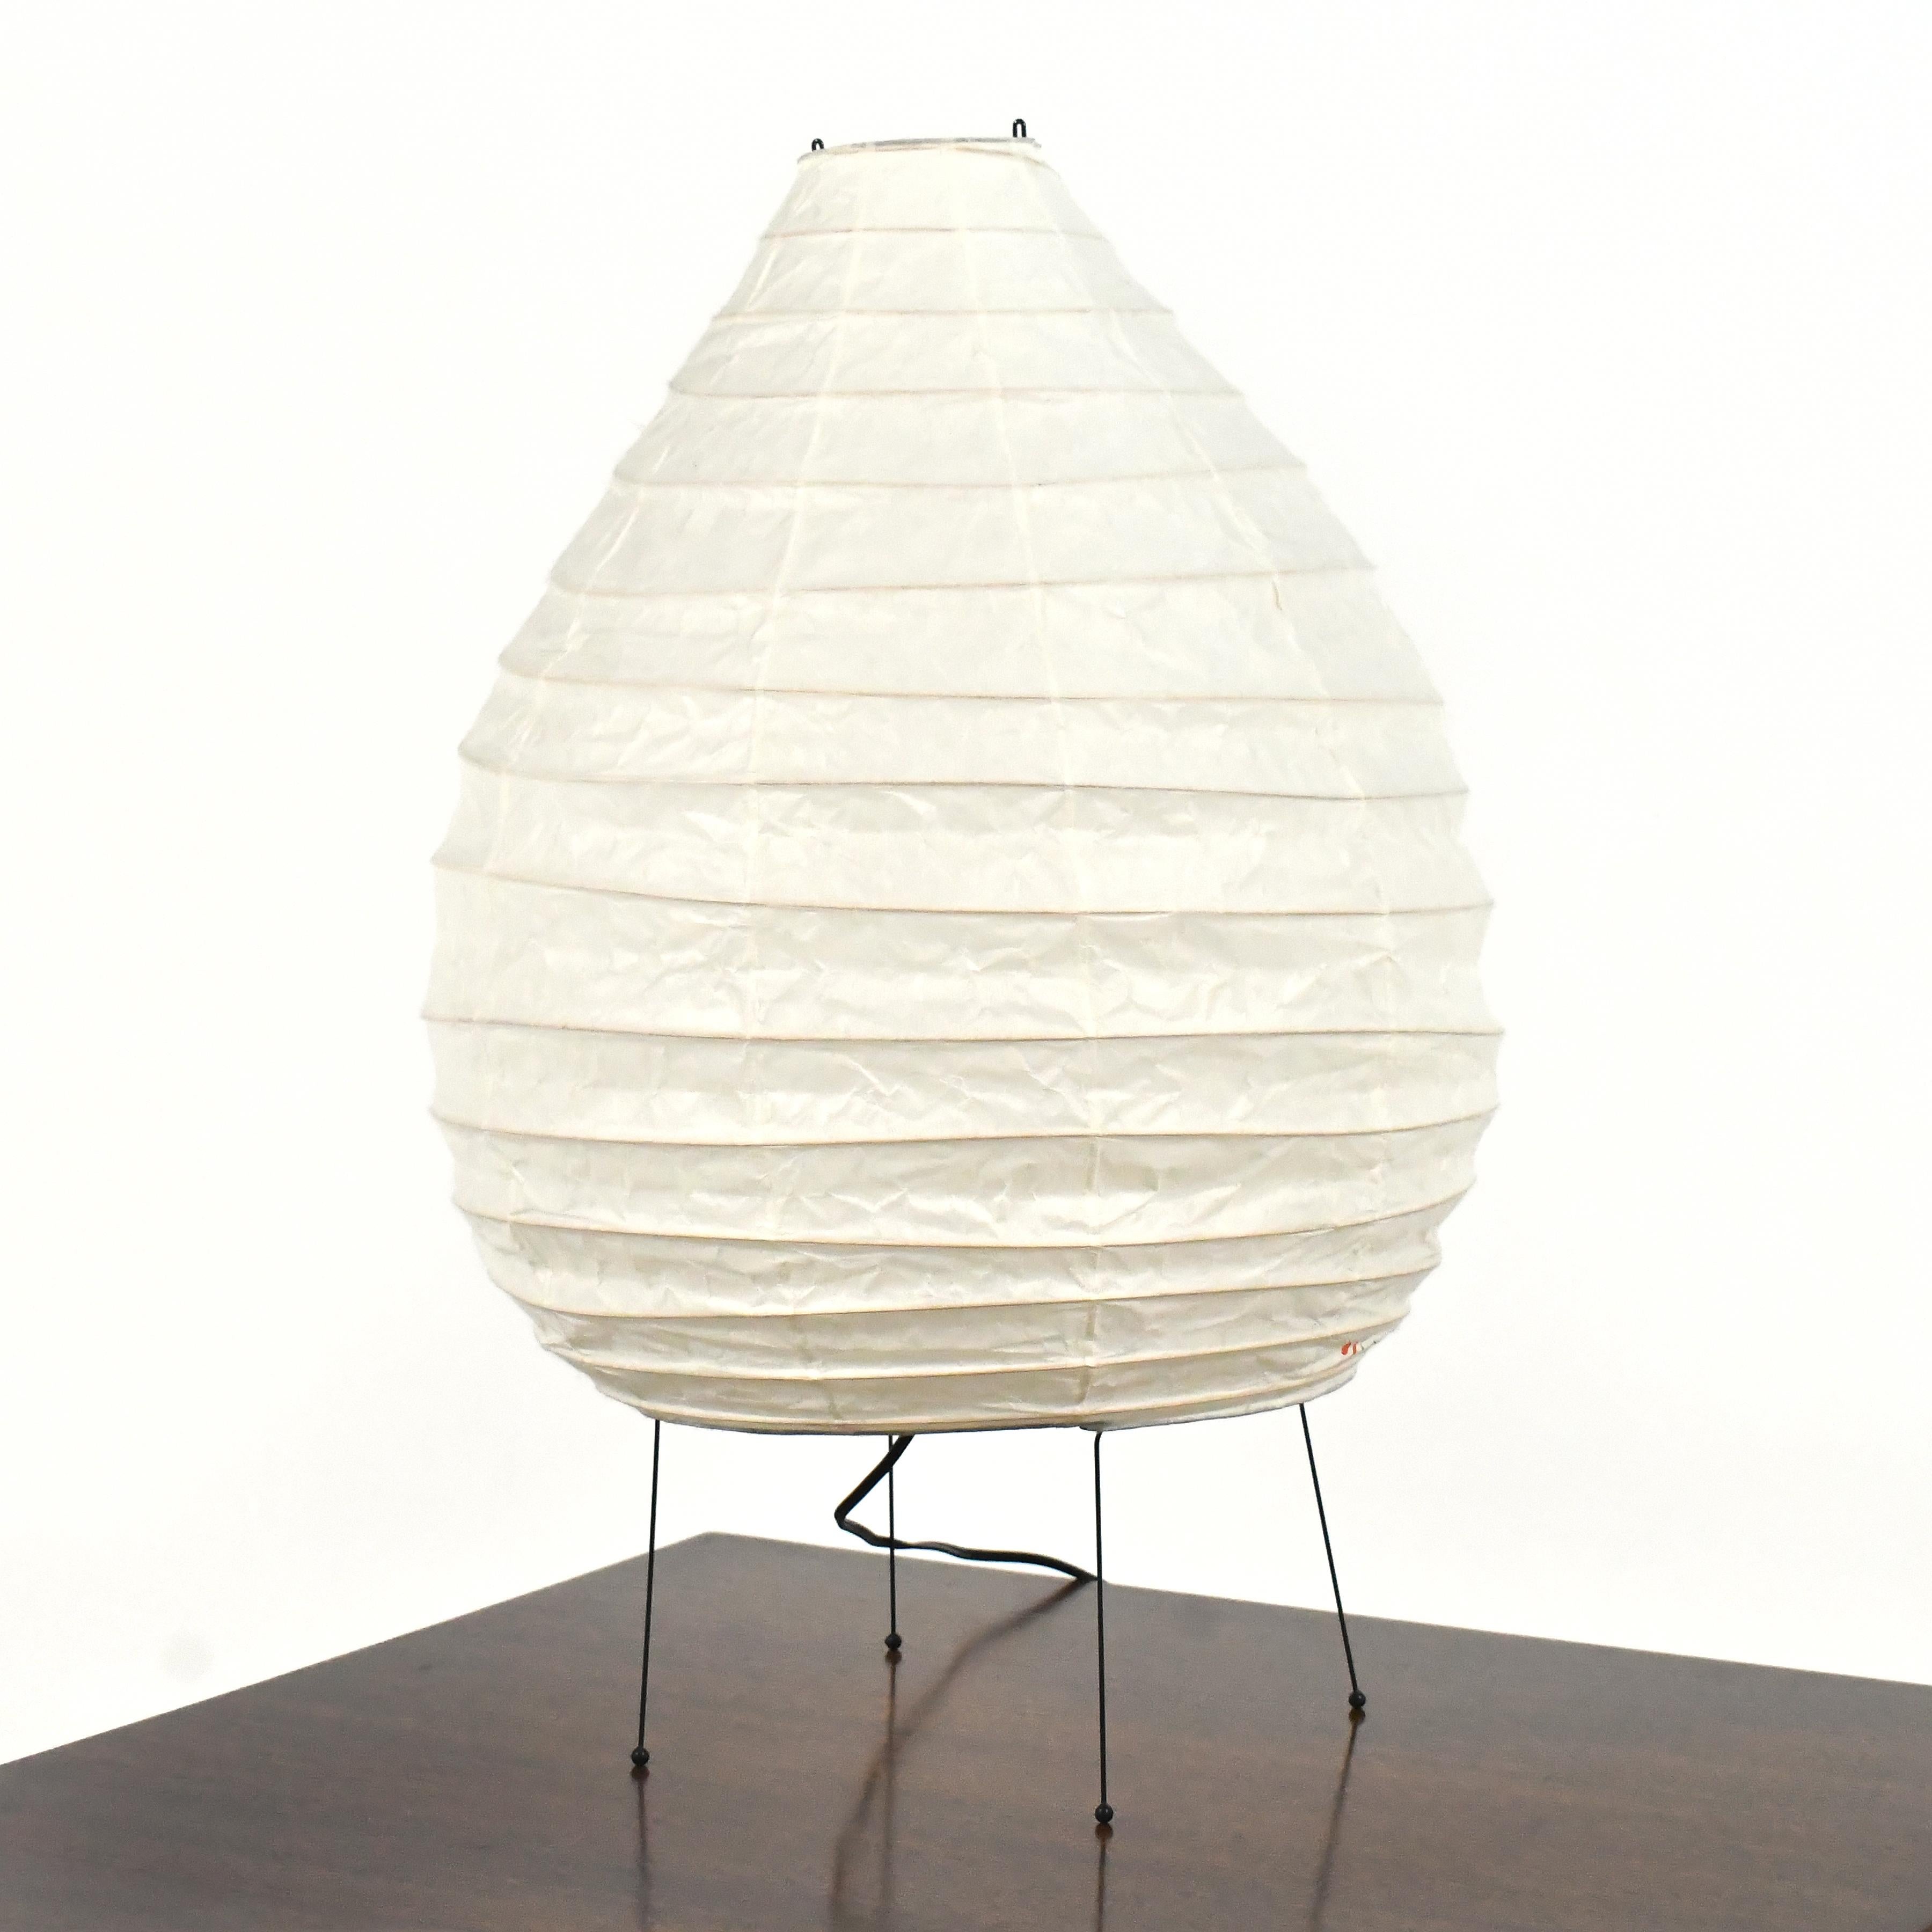 Noguchi designed a series of lamps starting in the 1950s, this 22N Akari designed in 1968 is a beautiful example of his 